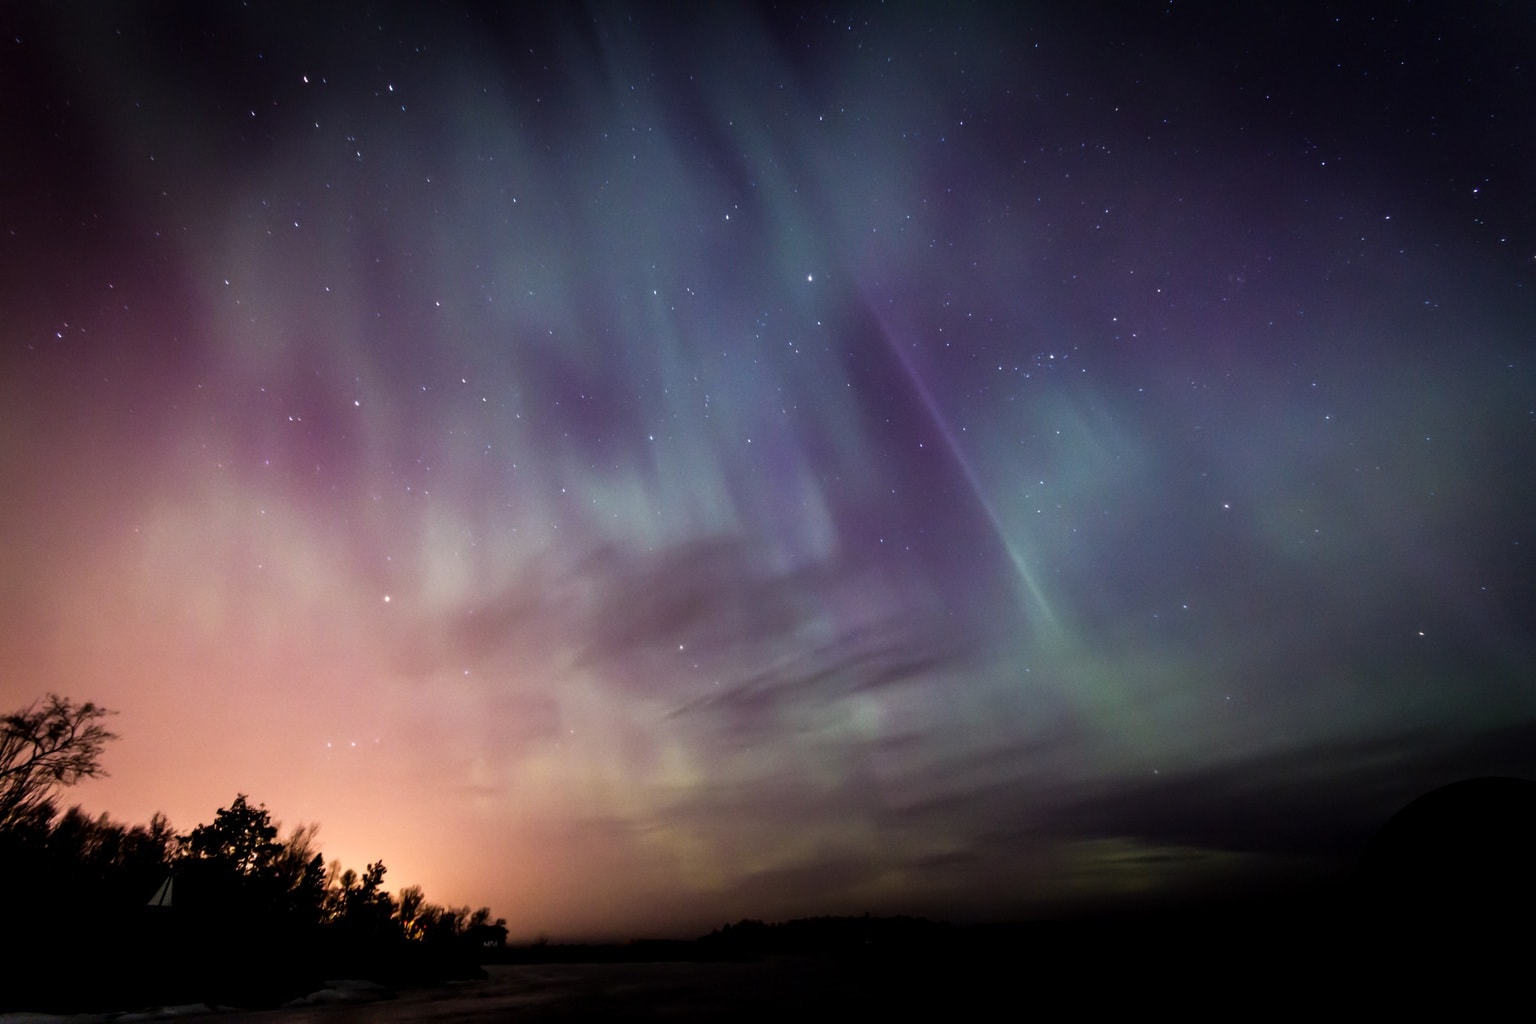 Aurora borealis in the night sky, with the colors pink, green, and purple